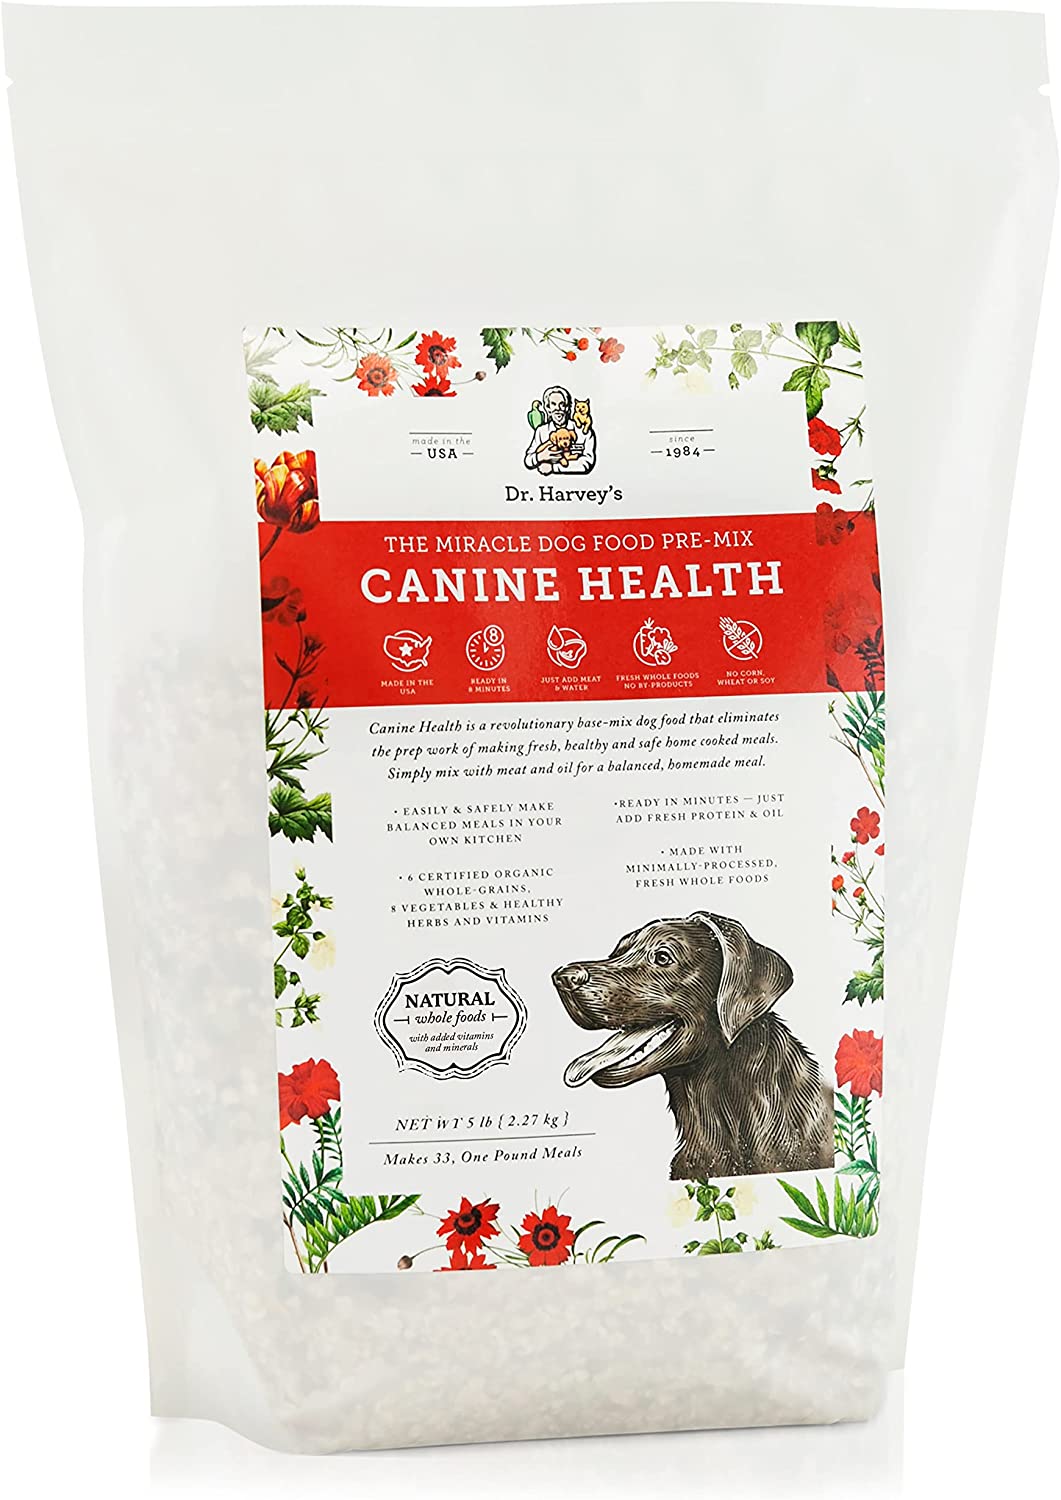 Dr. Harvey's Canine Health Miracle Dog Food, Human Grade Dehydrated Base Mix for Dogs with Organic Whole Grains and Vegetables